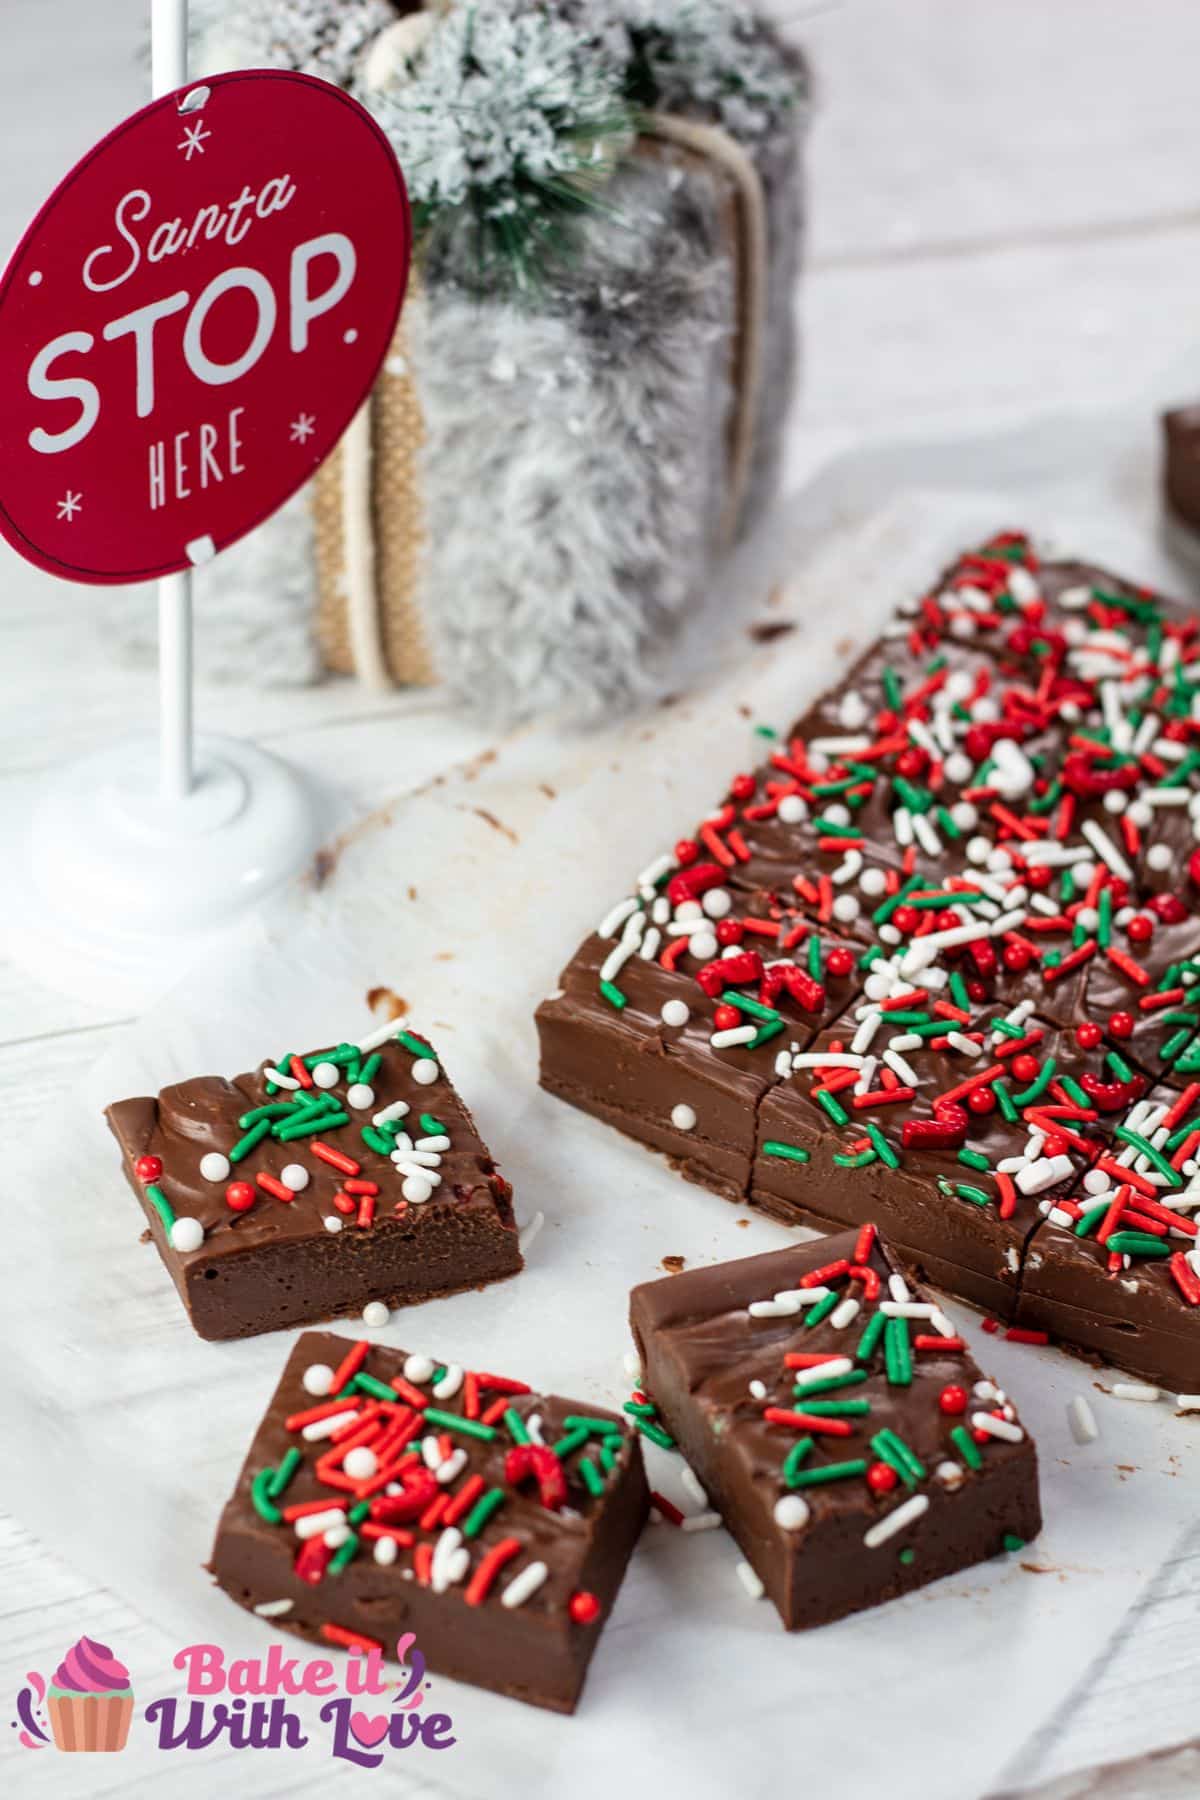 Tall image of Christmas fudge with sprinkles.